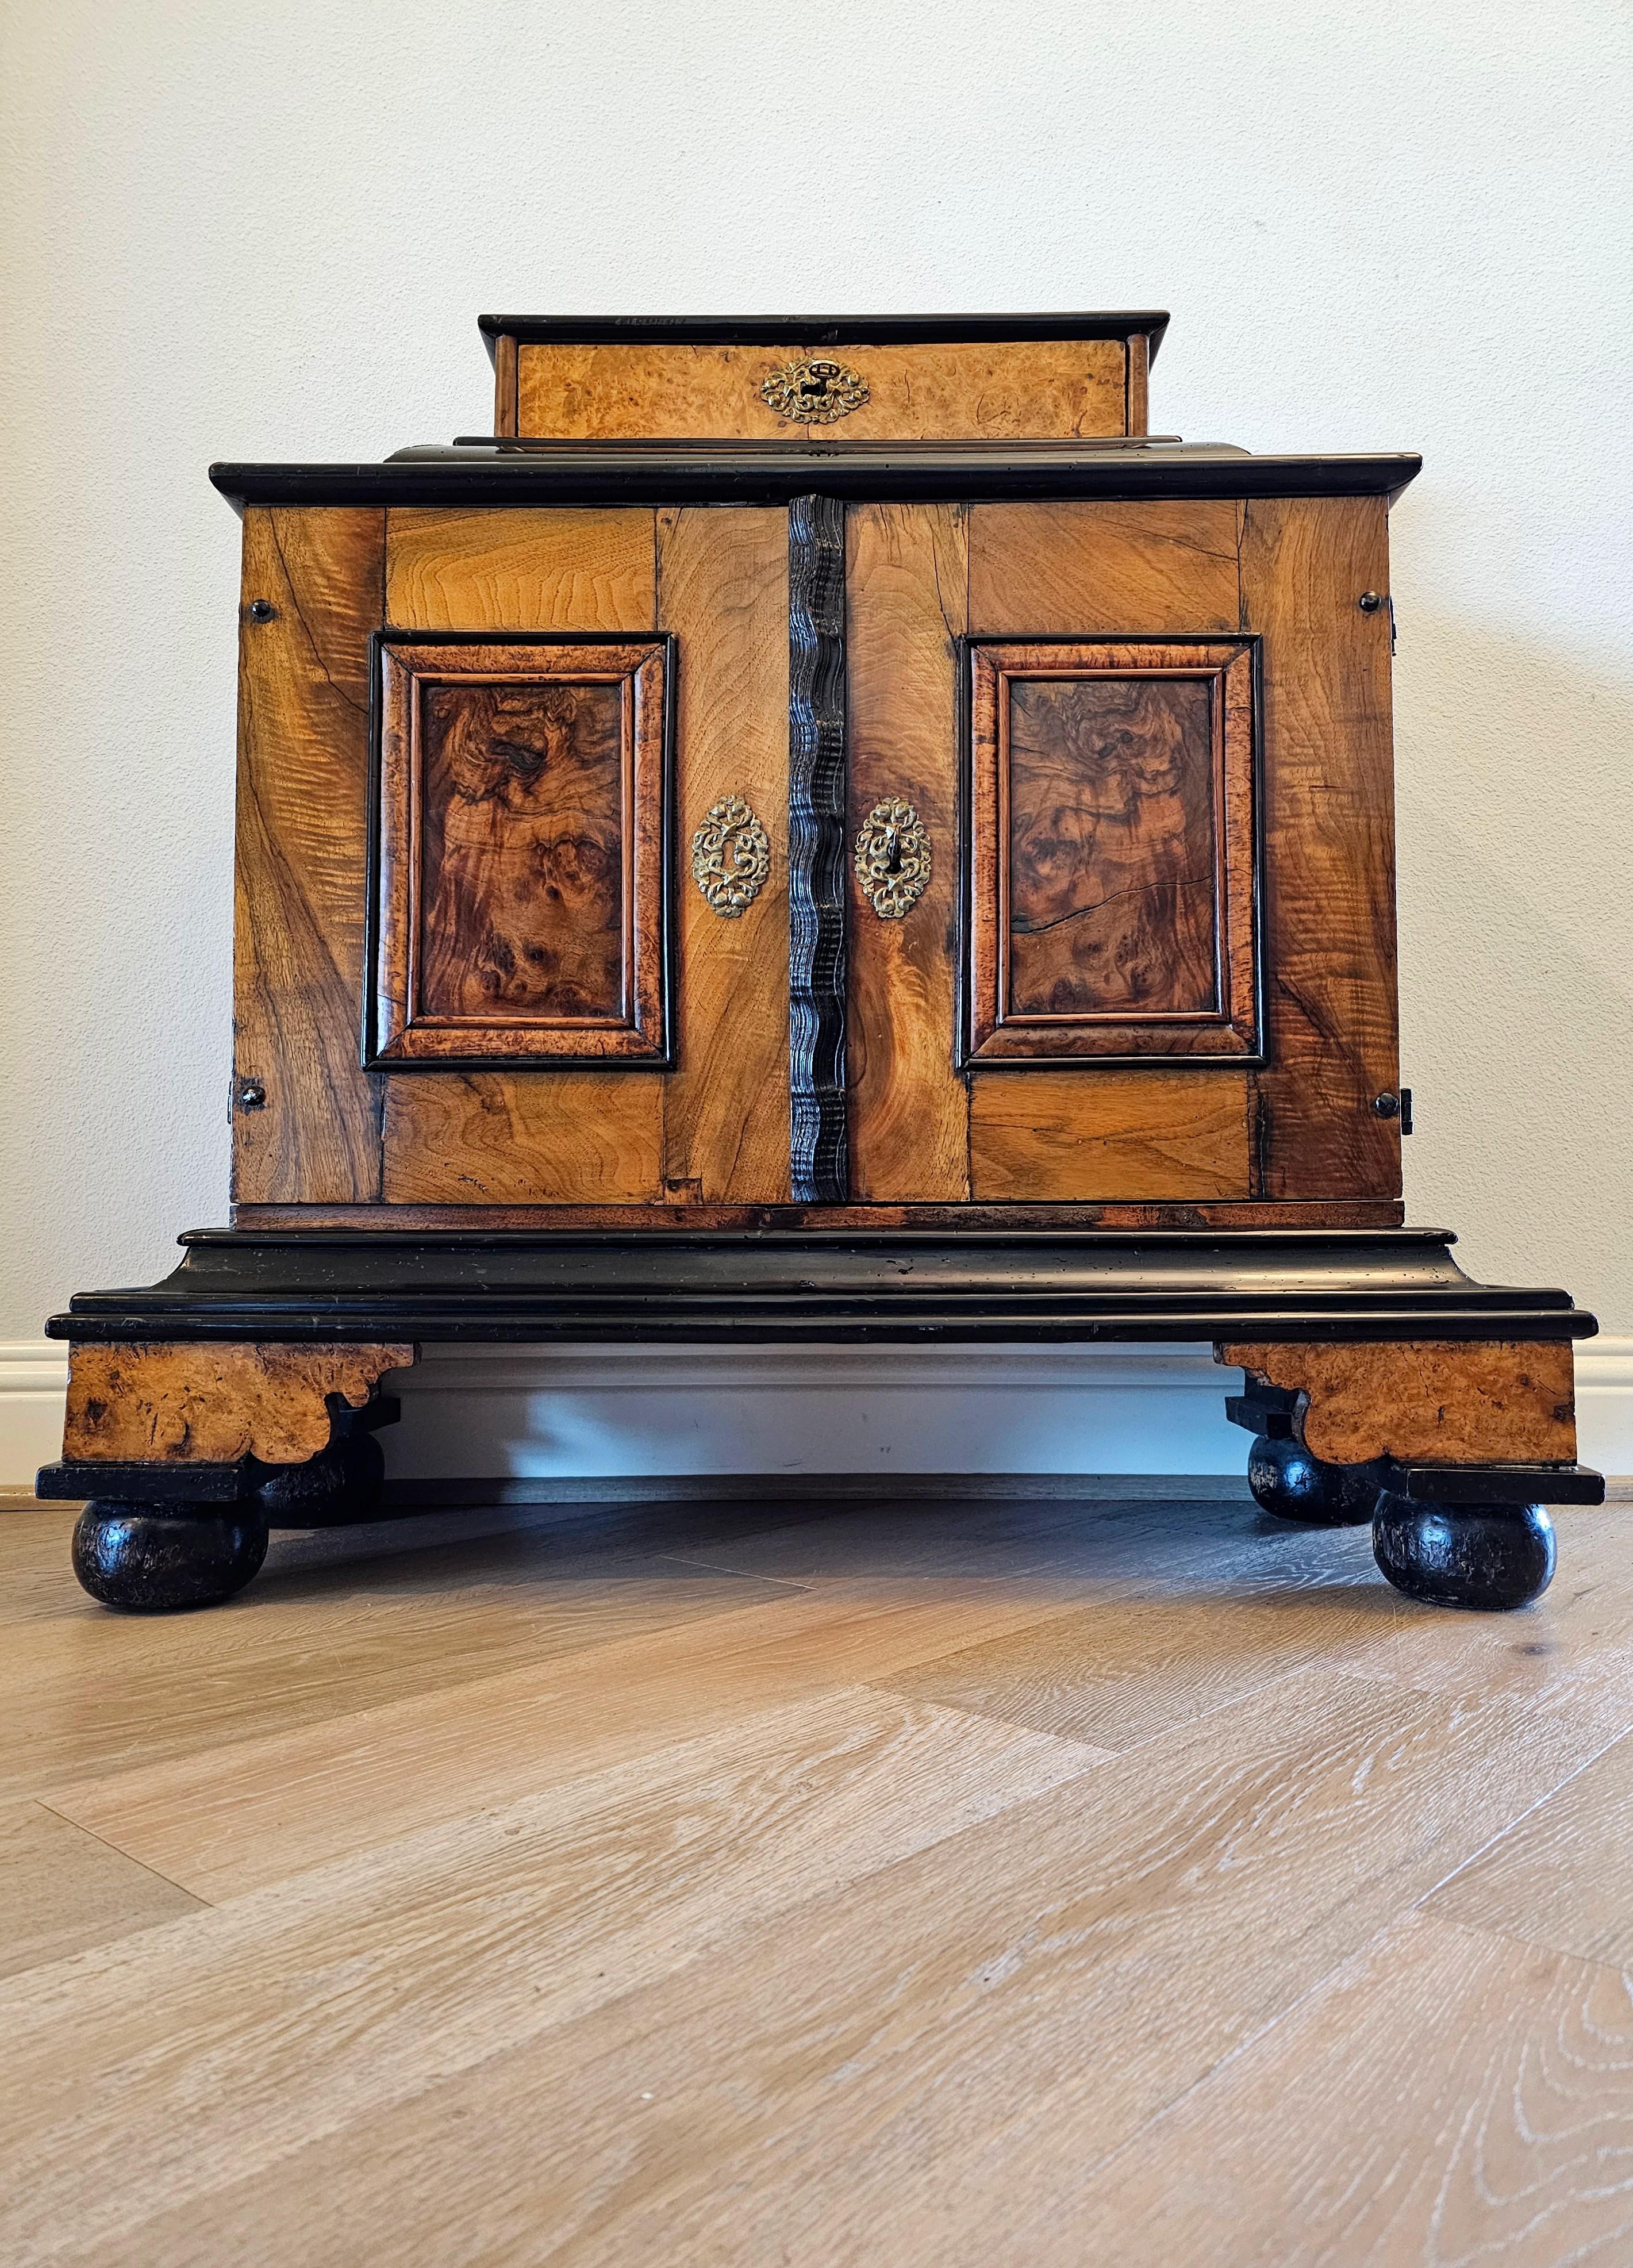 Biedermeier Period Burlwood Table Cabinet Of Curiosities Wunderkammer 19th C. In Good Condition For Sale In Forney, TX